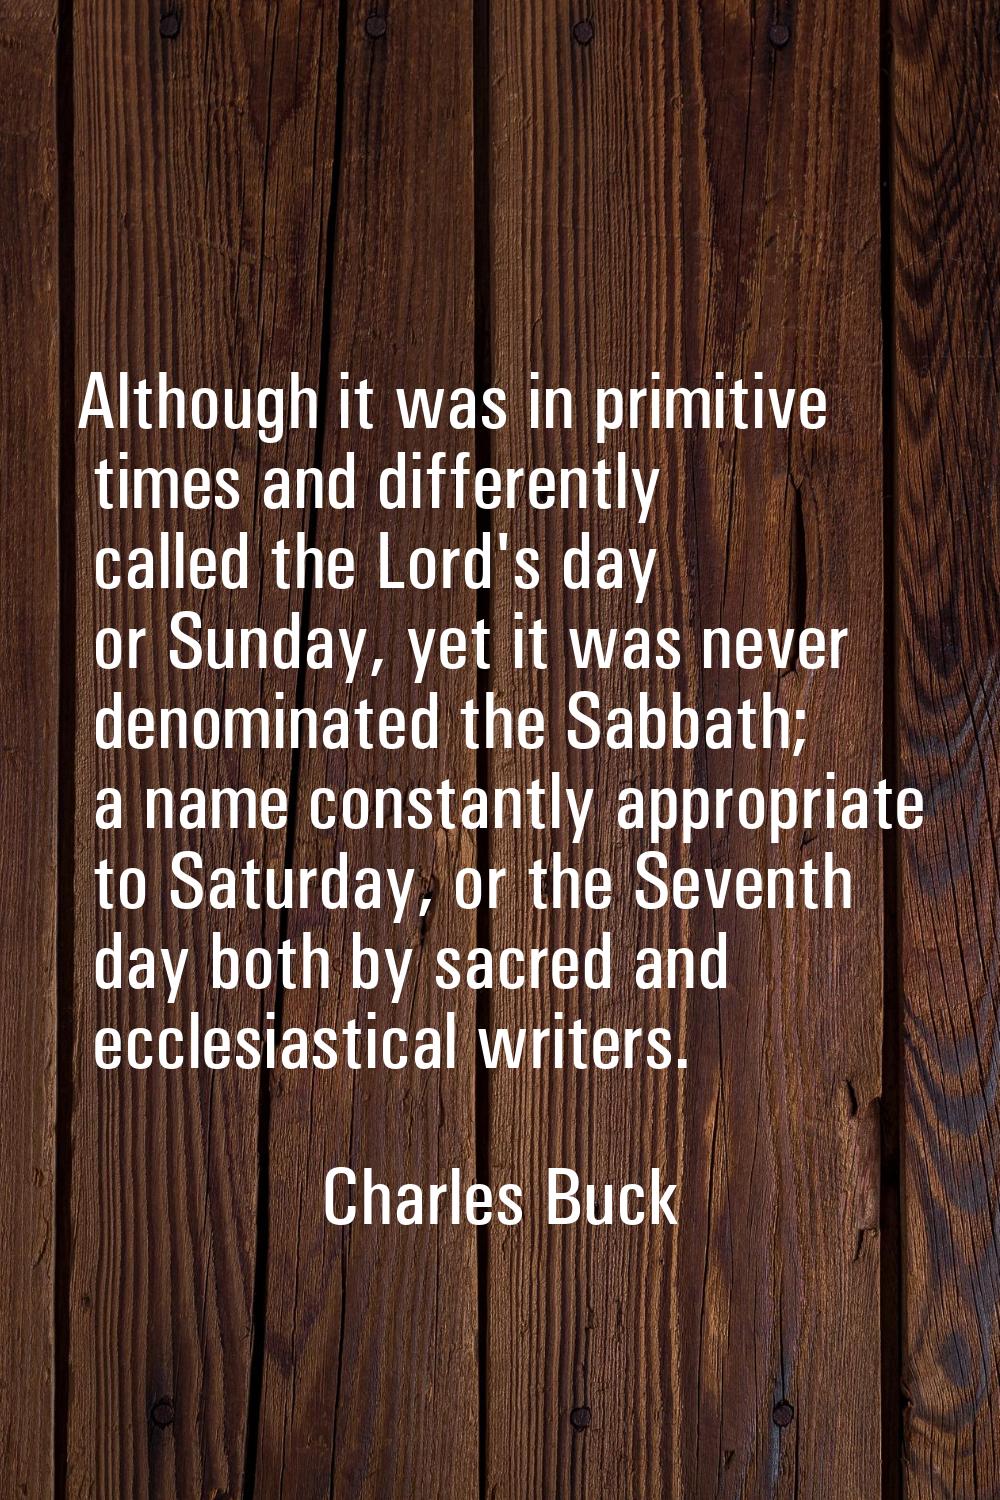 Although it was in primitive times and differently called the Lord's day or Sunday, yet it was neve